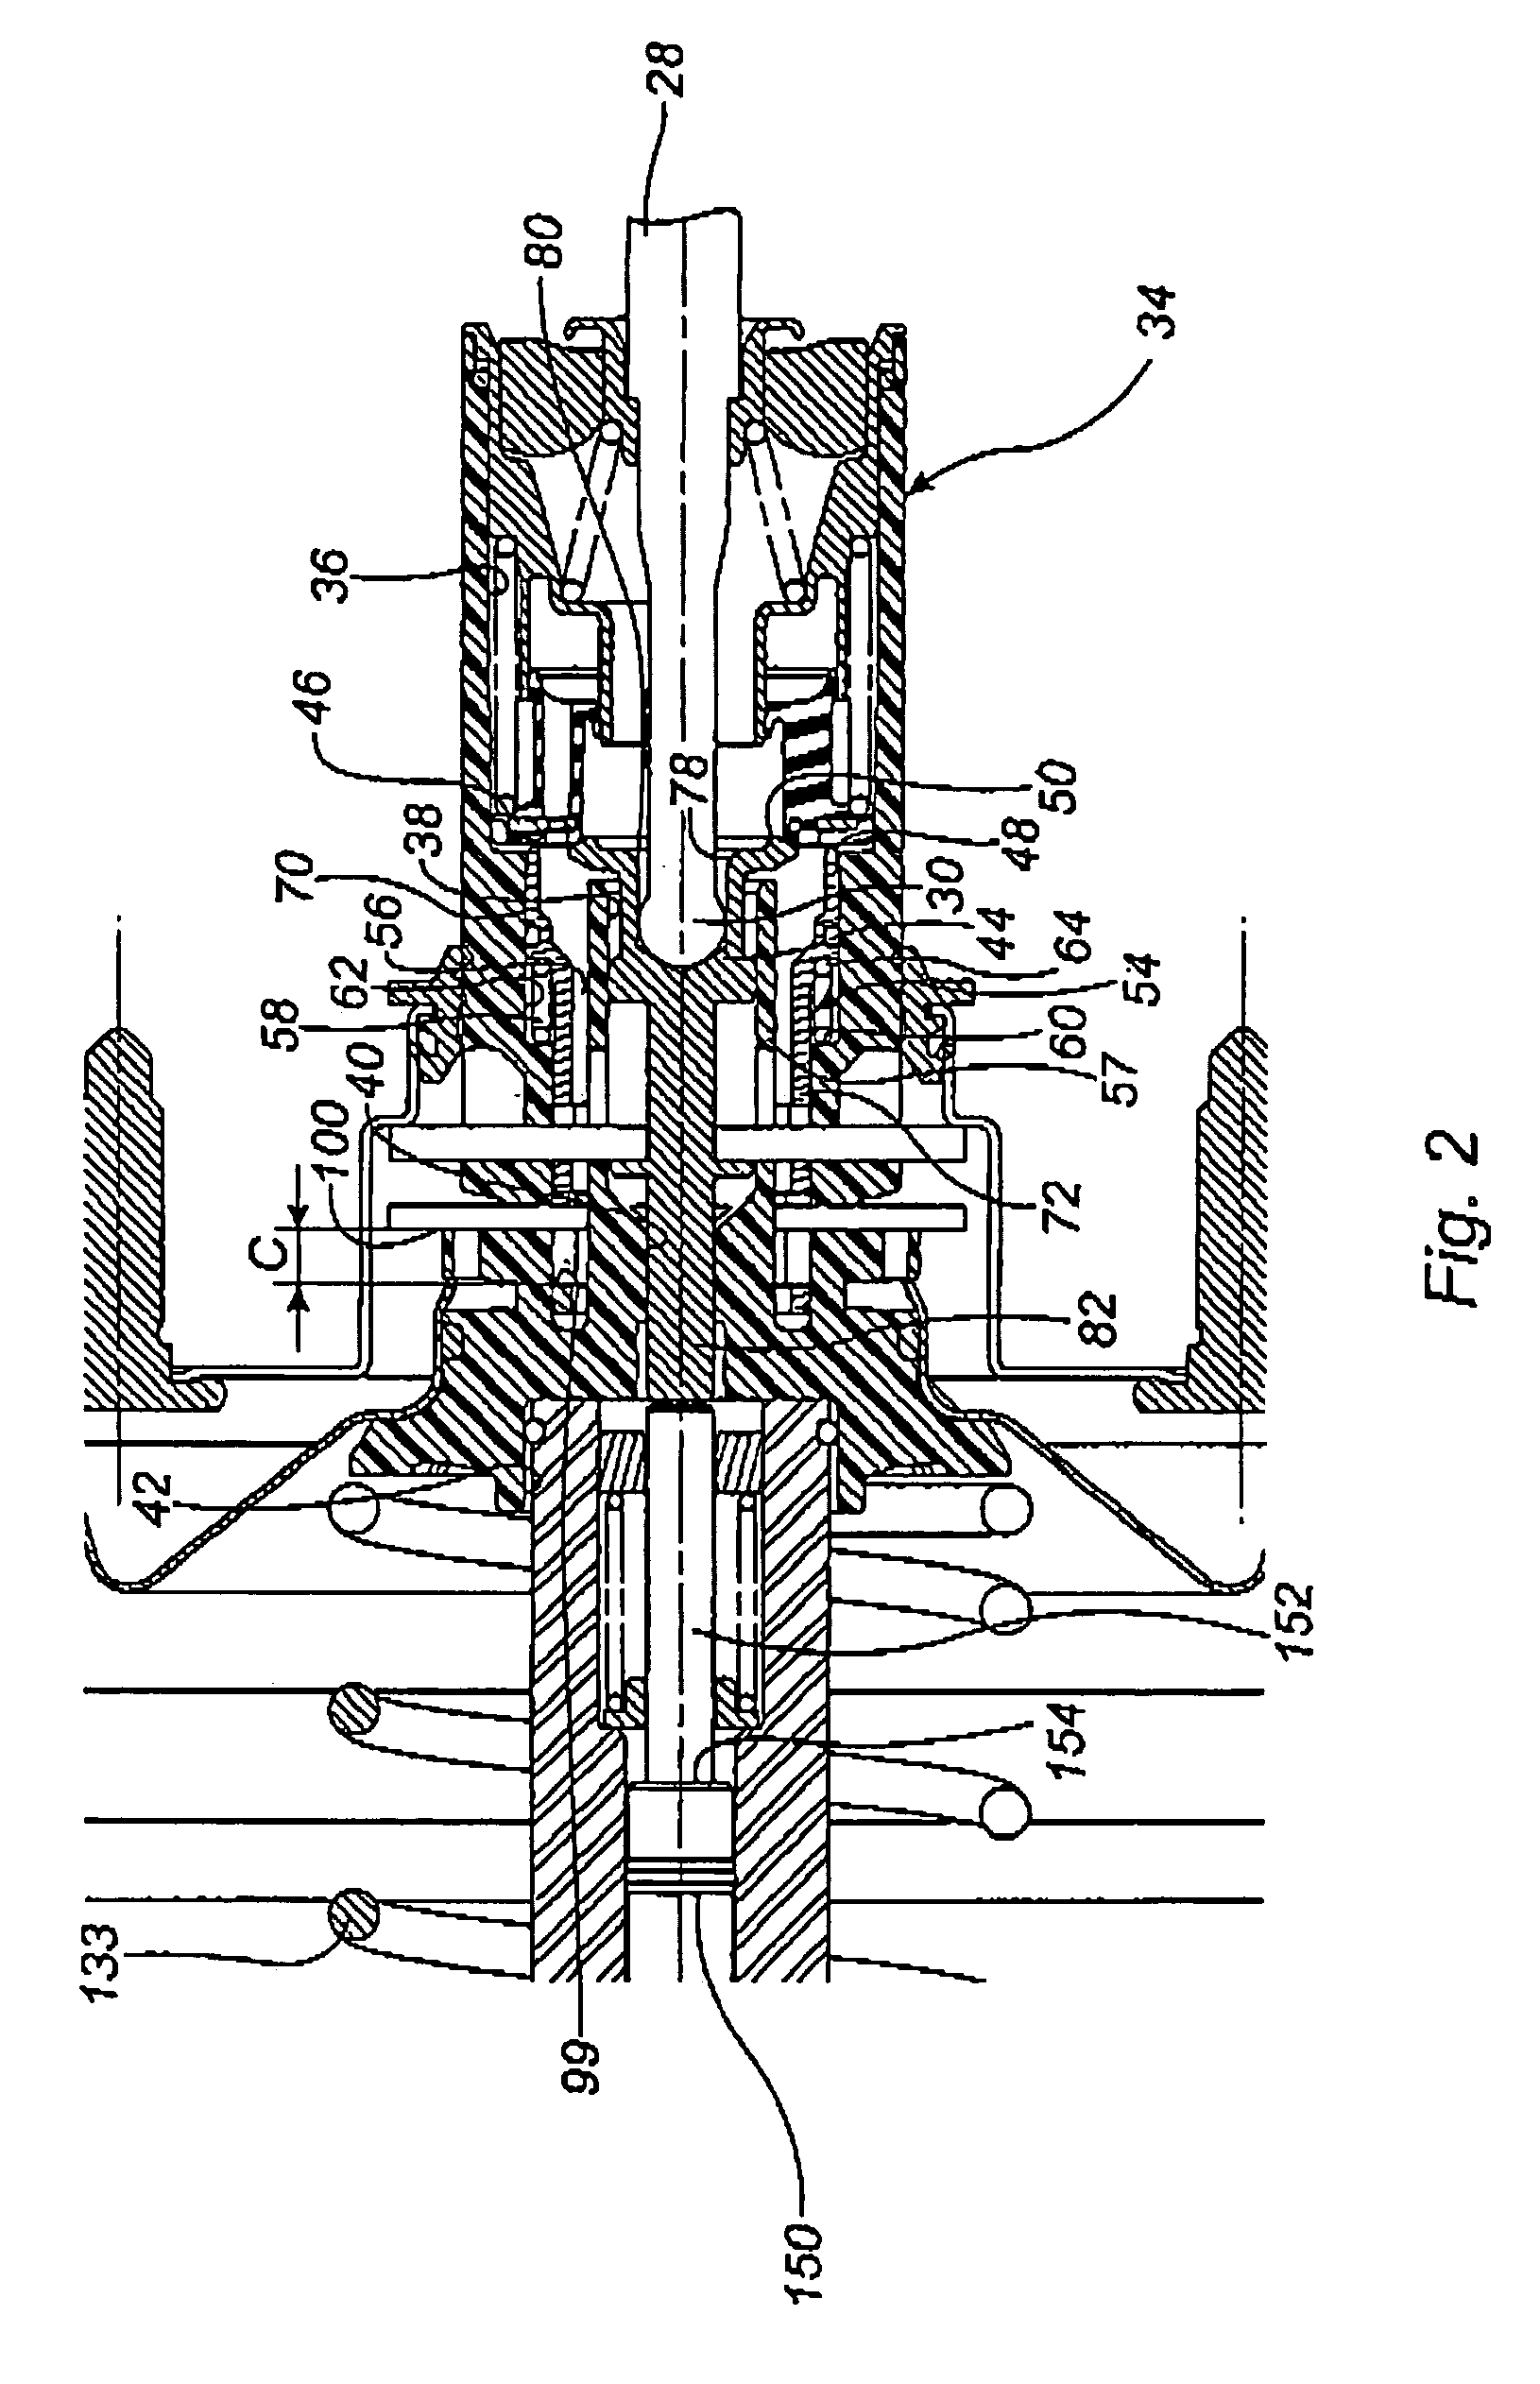 Booster with reduced dead travel and a braking system comprising such a booster